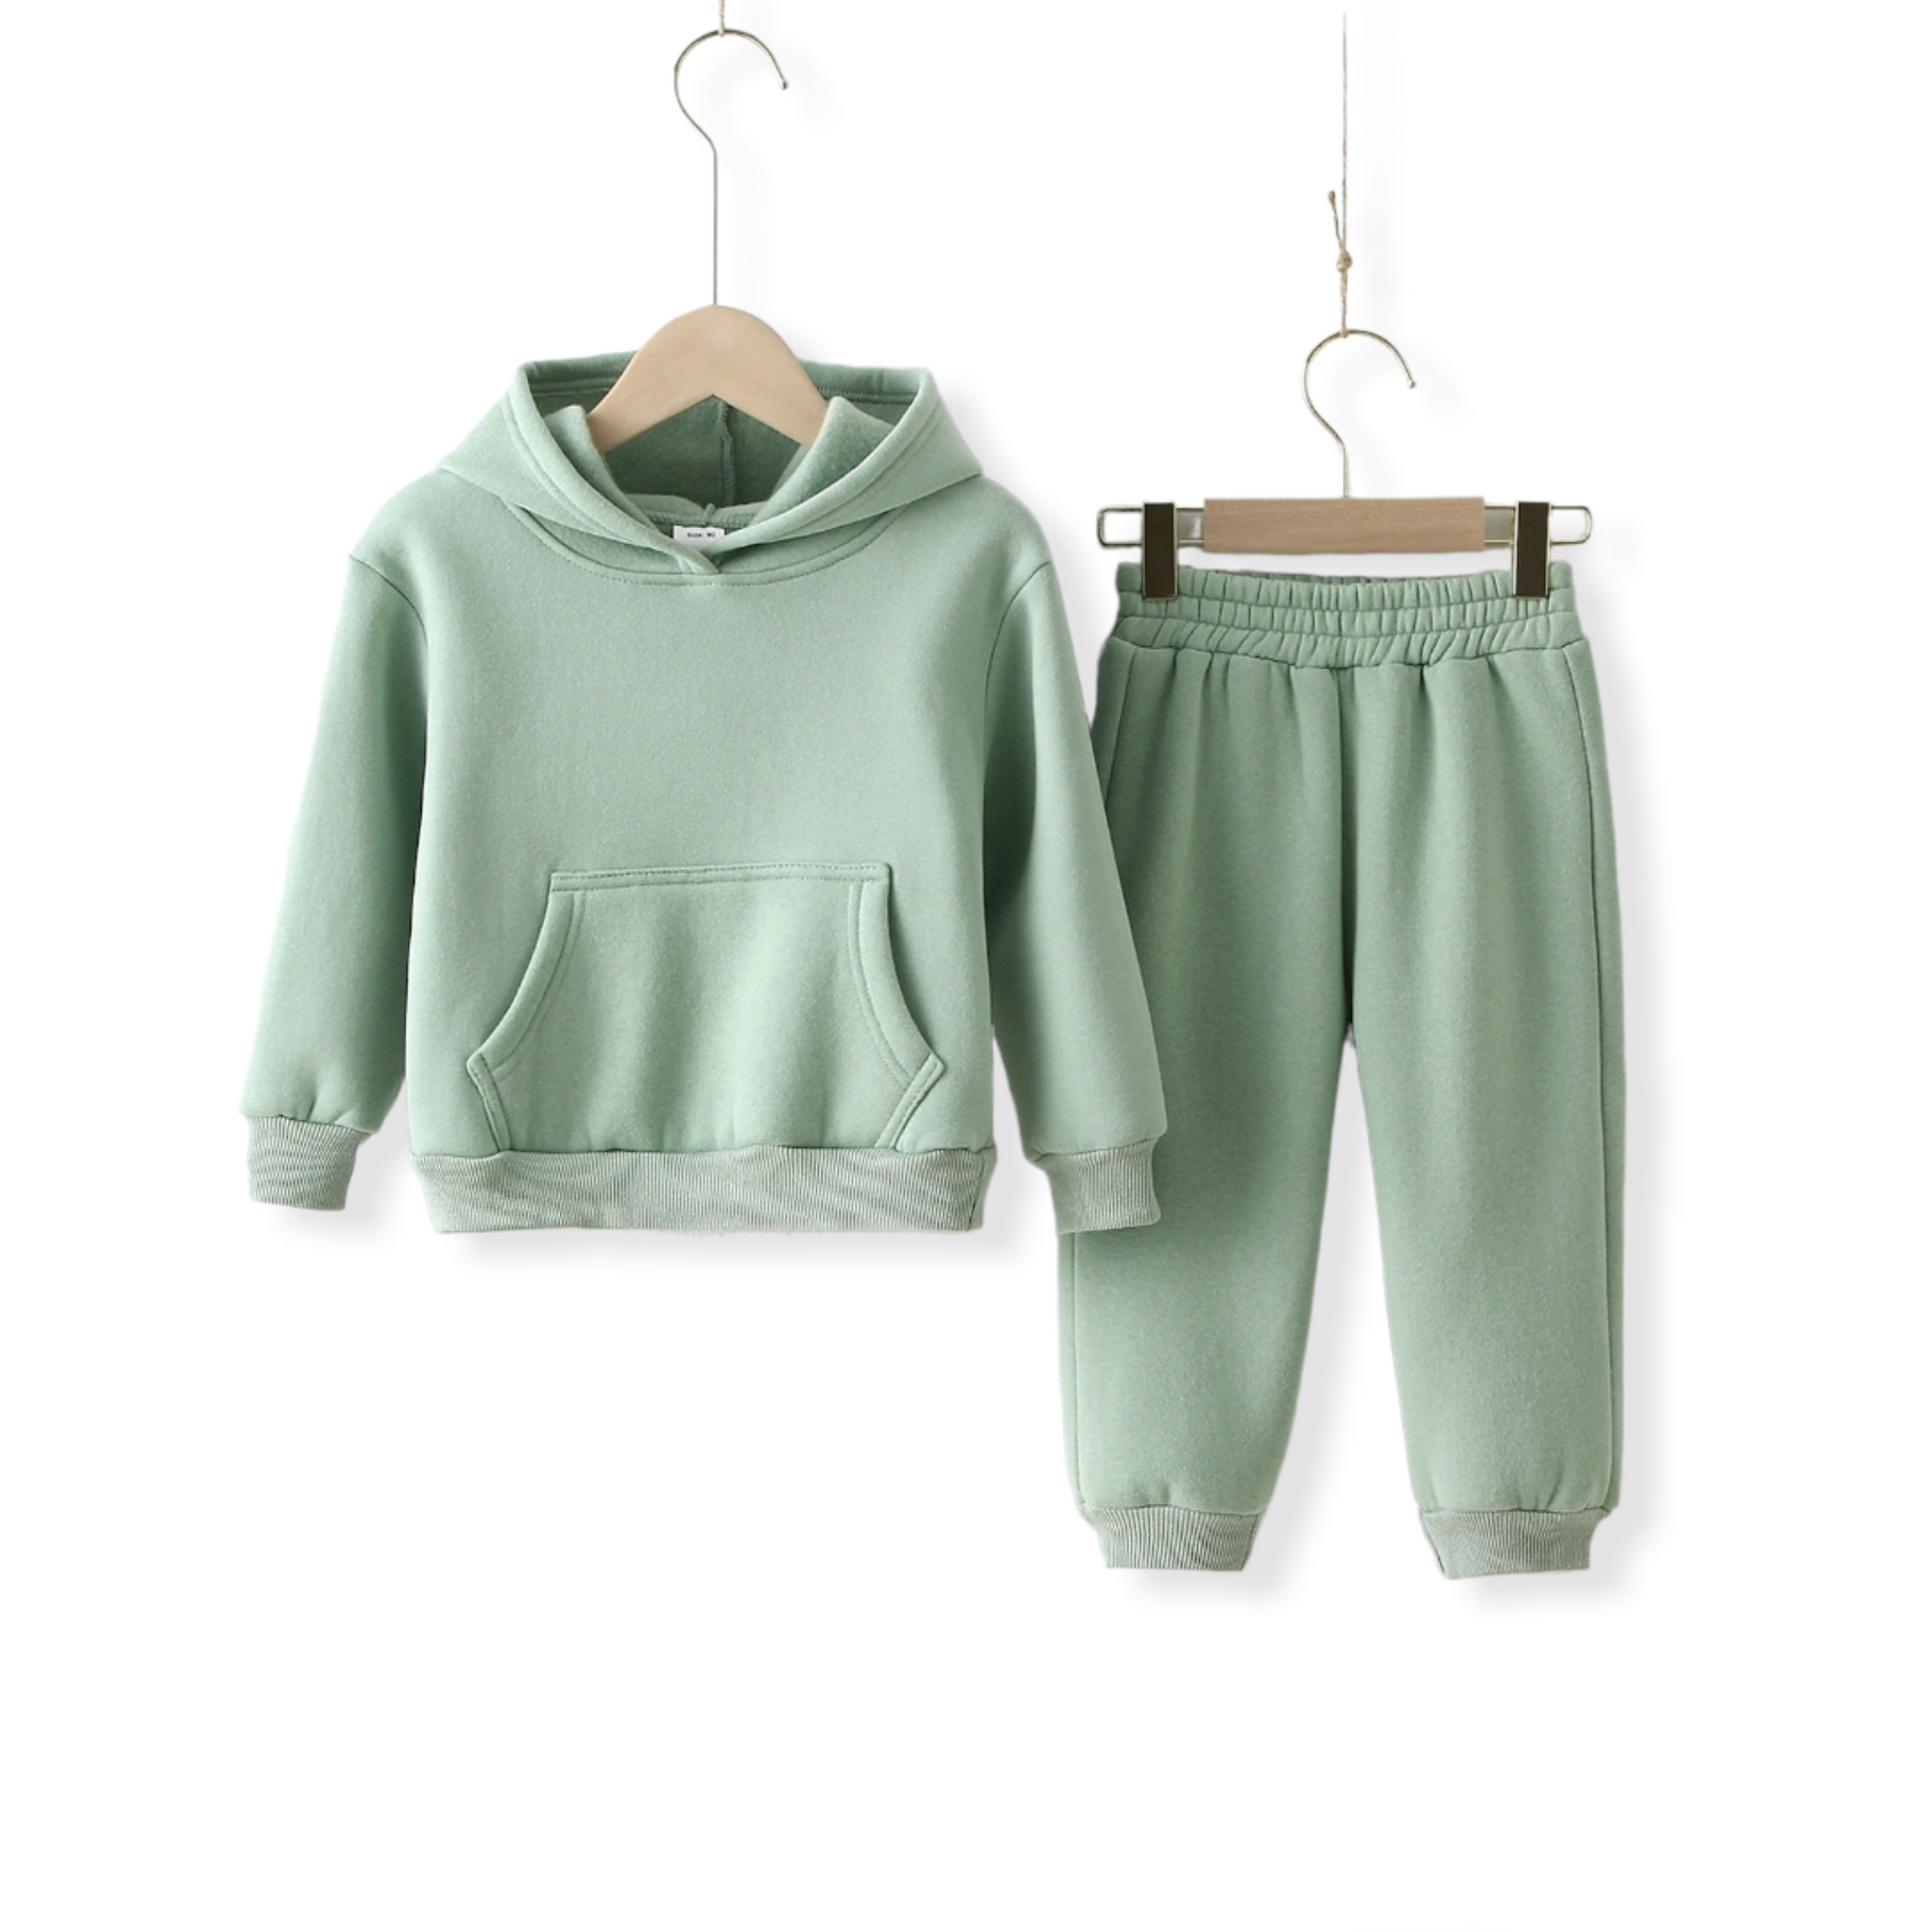 Green mint warm unisex tracksuit for kids and toddlers hung on a hanger against a white wall from hunny bubba kids